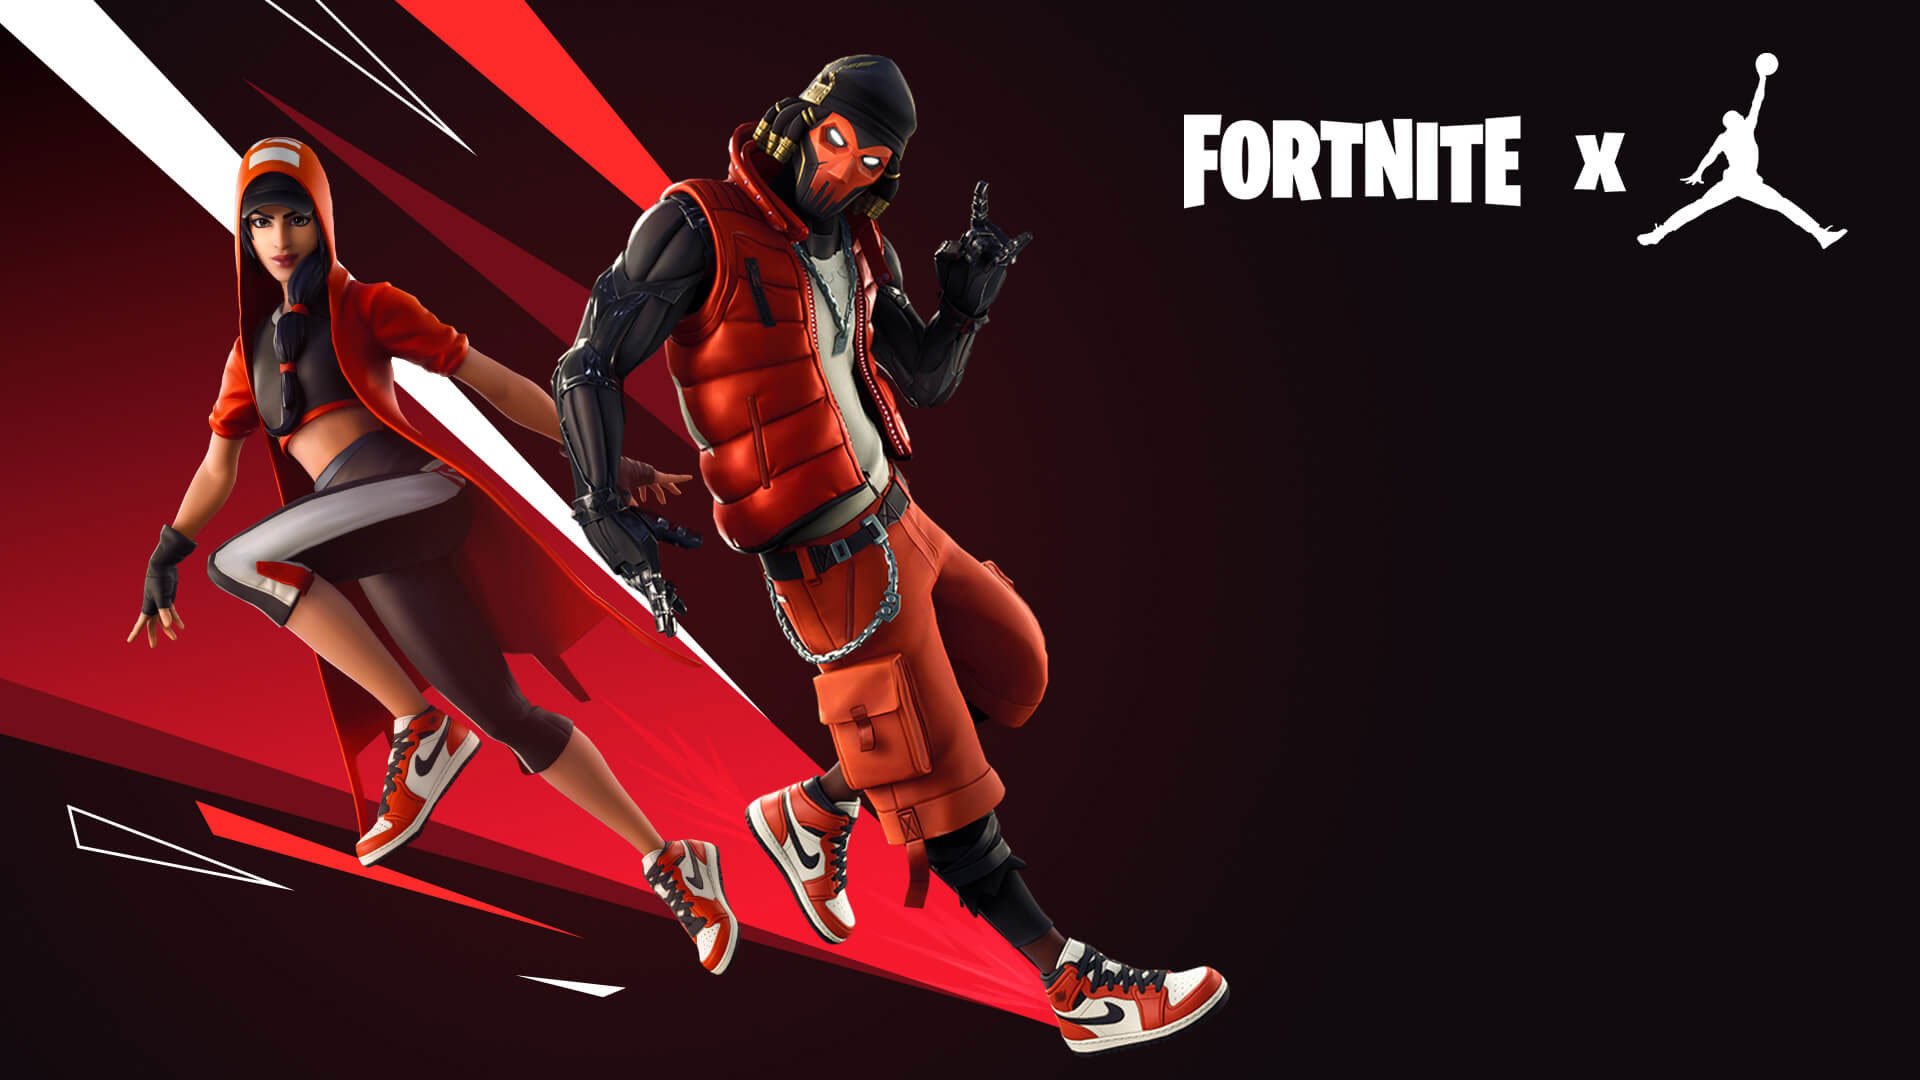 Fortnite Grind Skin - Character, PNG, Images - Pro Game Guides